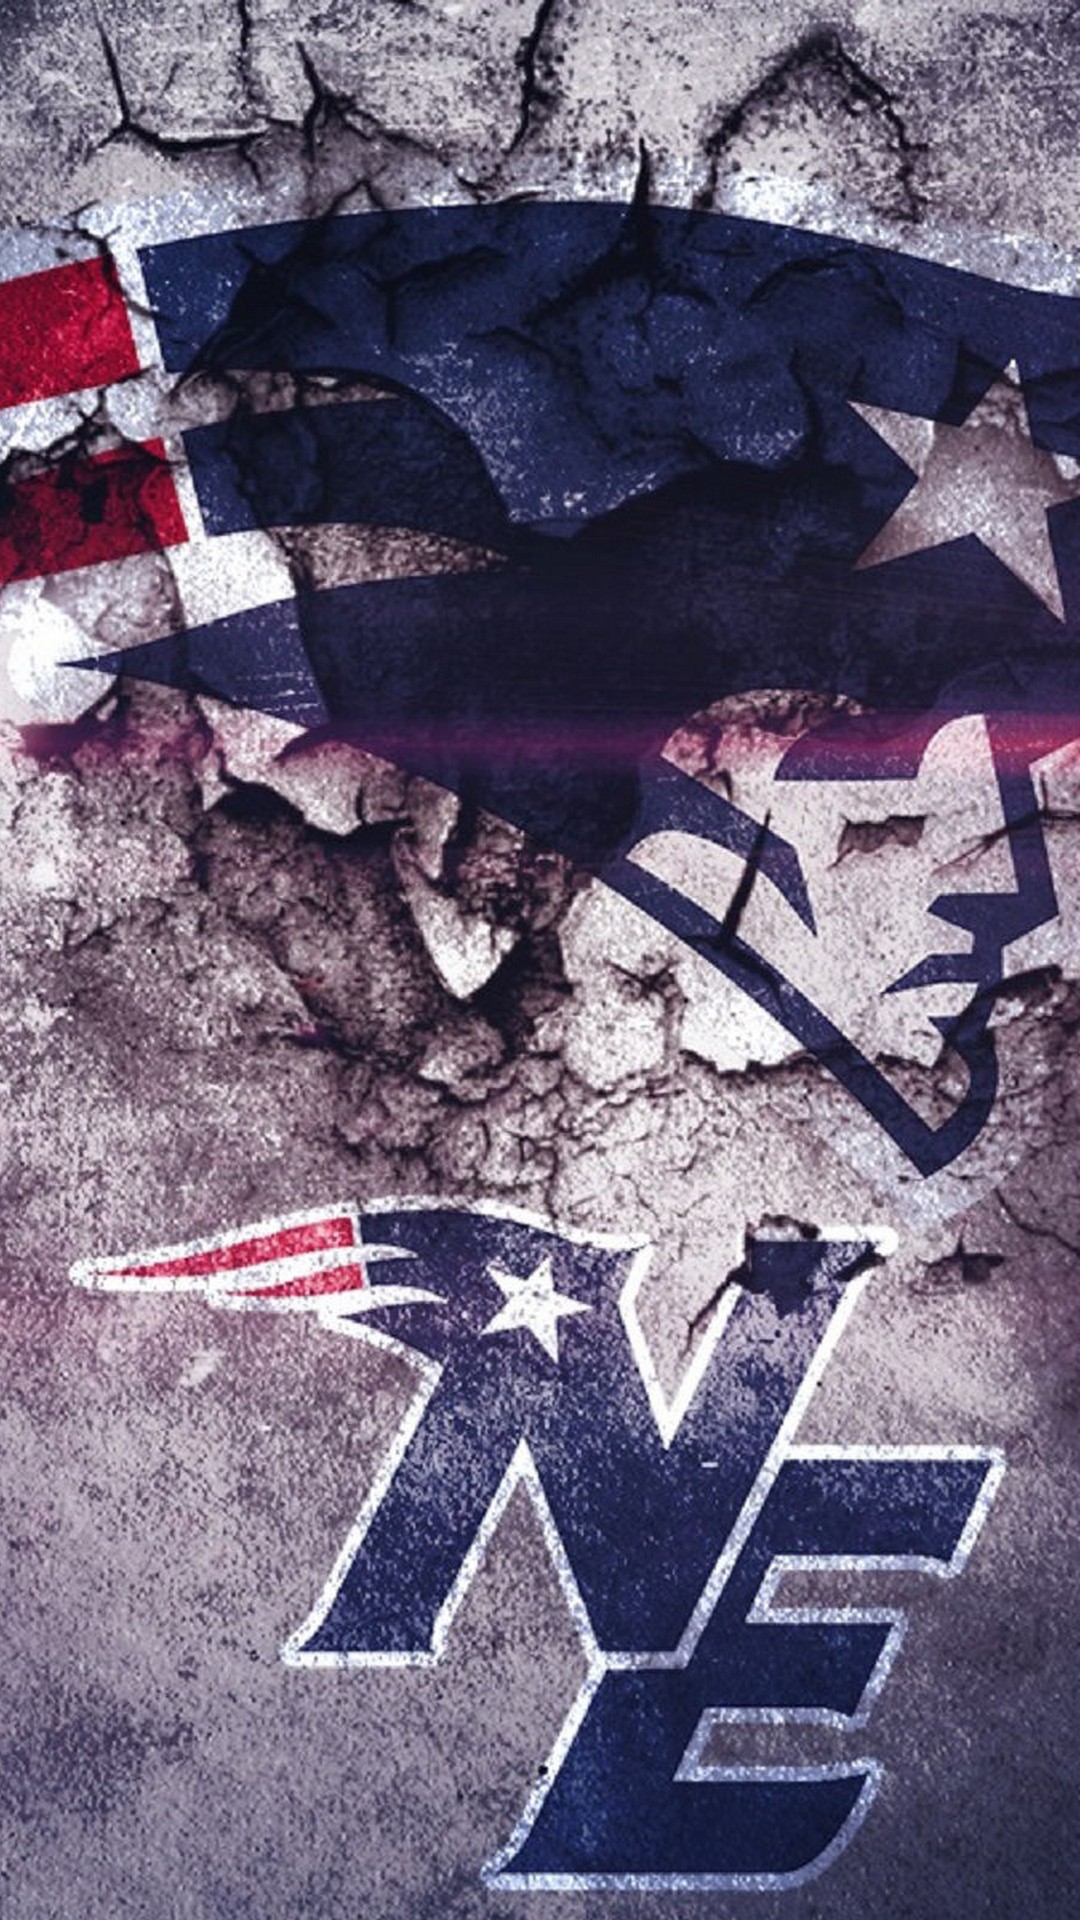 New England Patriots iPhone Wallpaper Home Screen with high-resolution 1080x1920 pixel. Download and set as wallpaper for Apple iPhone X, XS Max, XR, 8, 7, 6, SE, iPad, Android